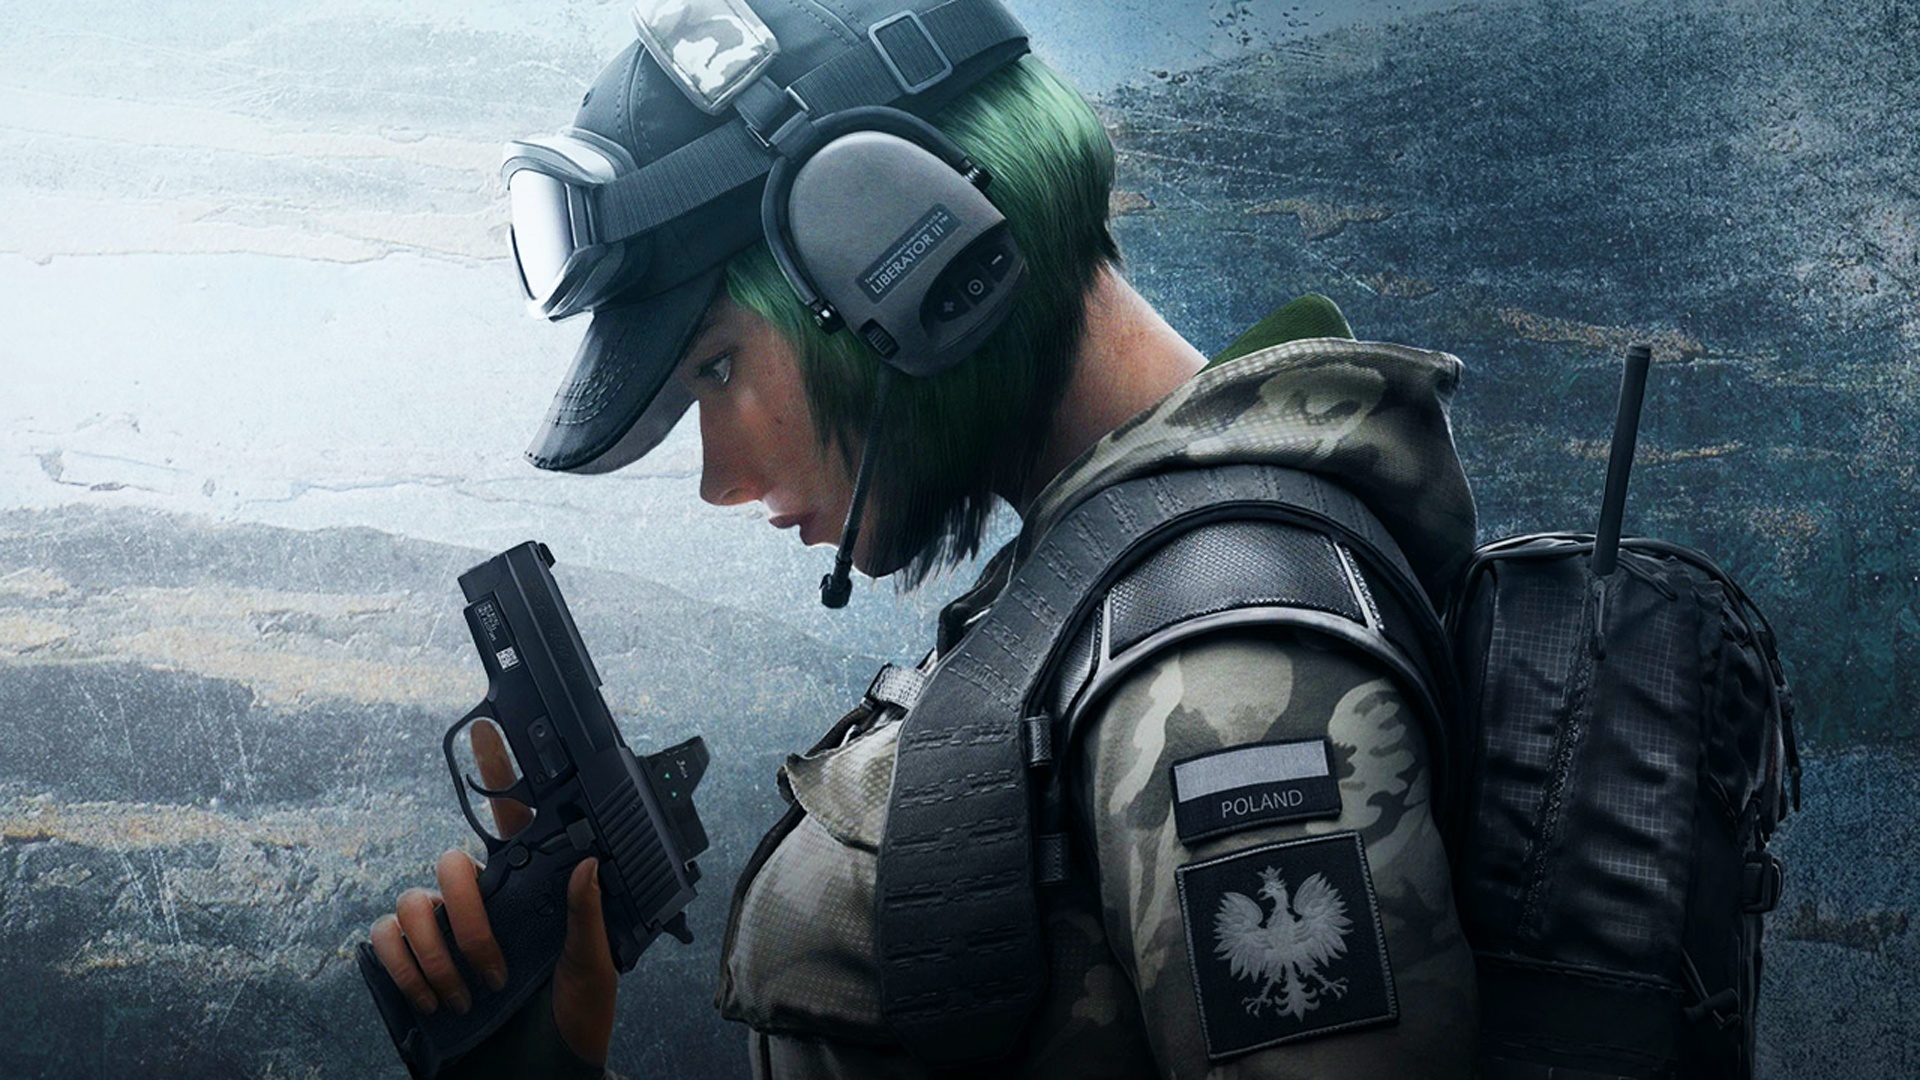 Rainbow Six Siege Year 7 Is A Definitive Narrative Shift That's Building To  Something Big - GameSpot